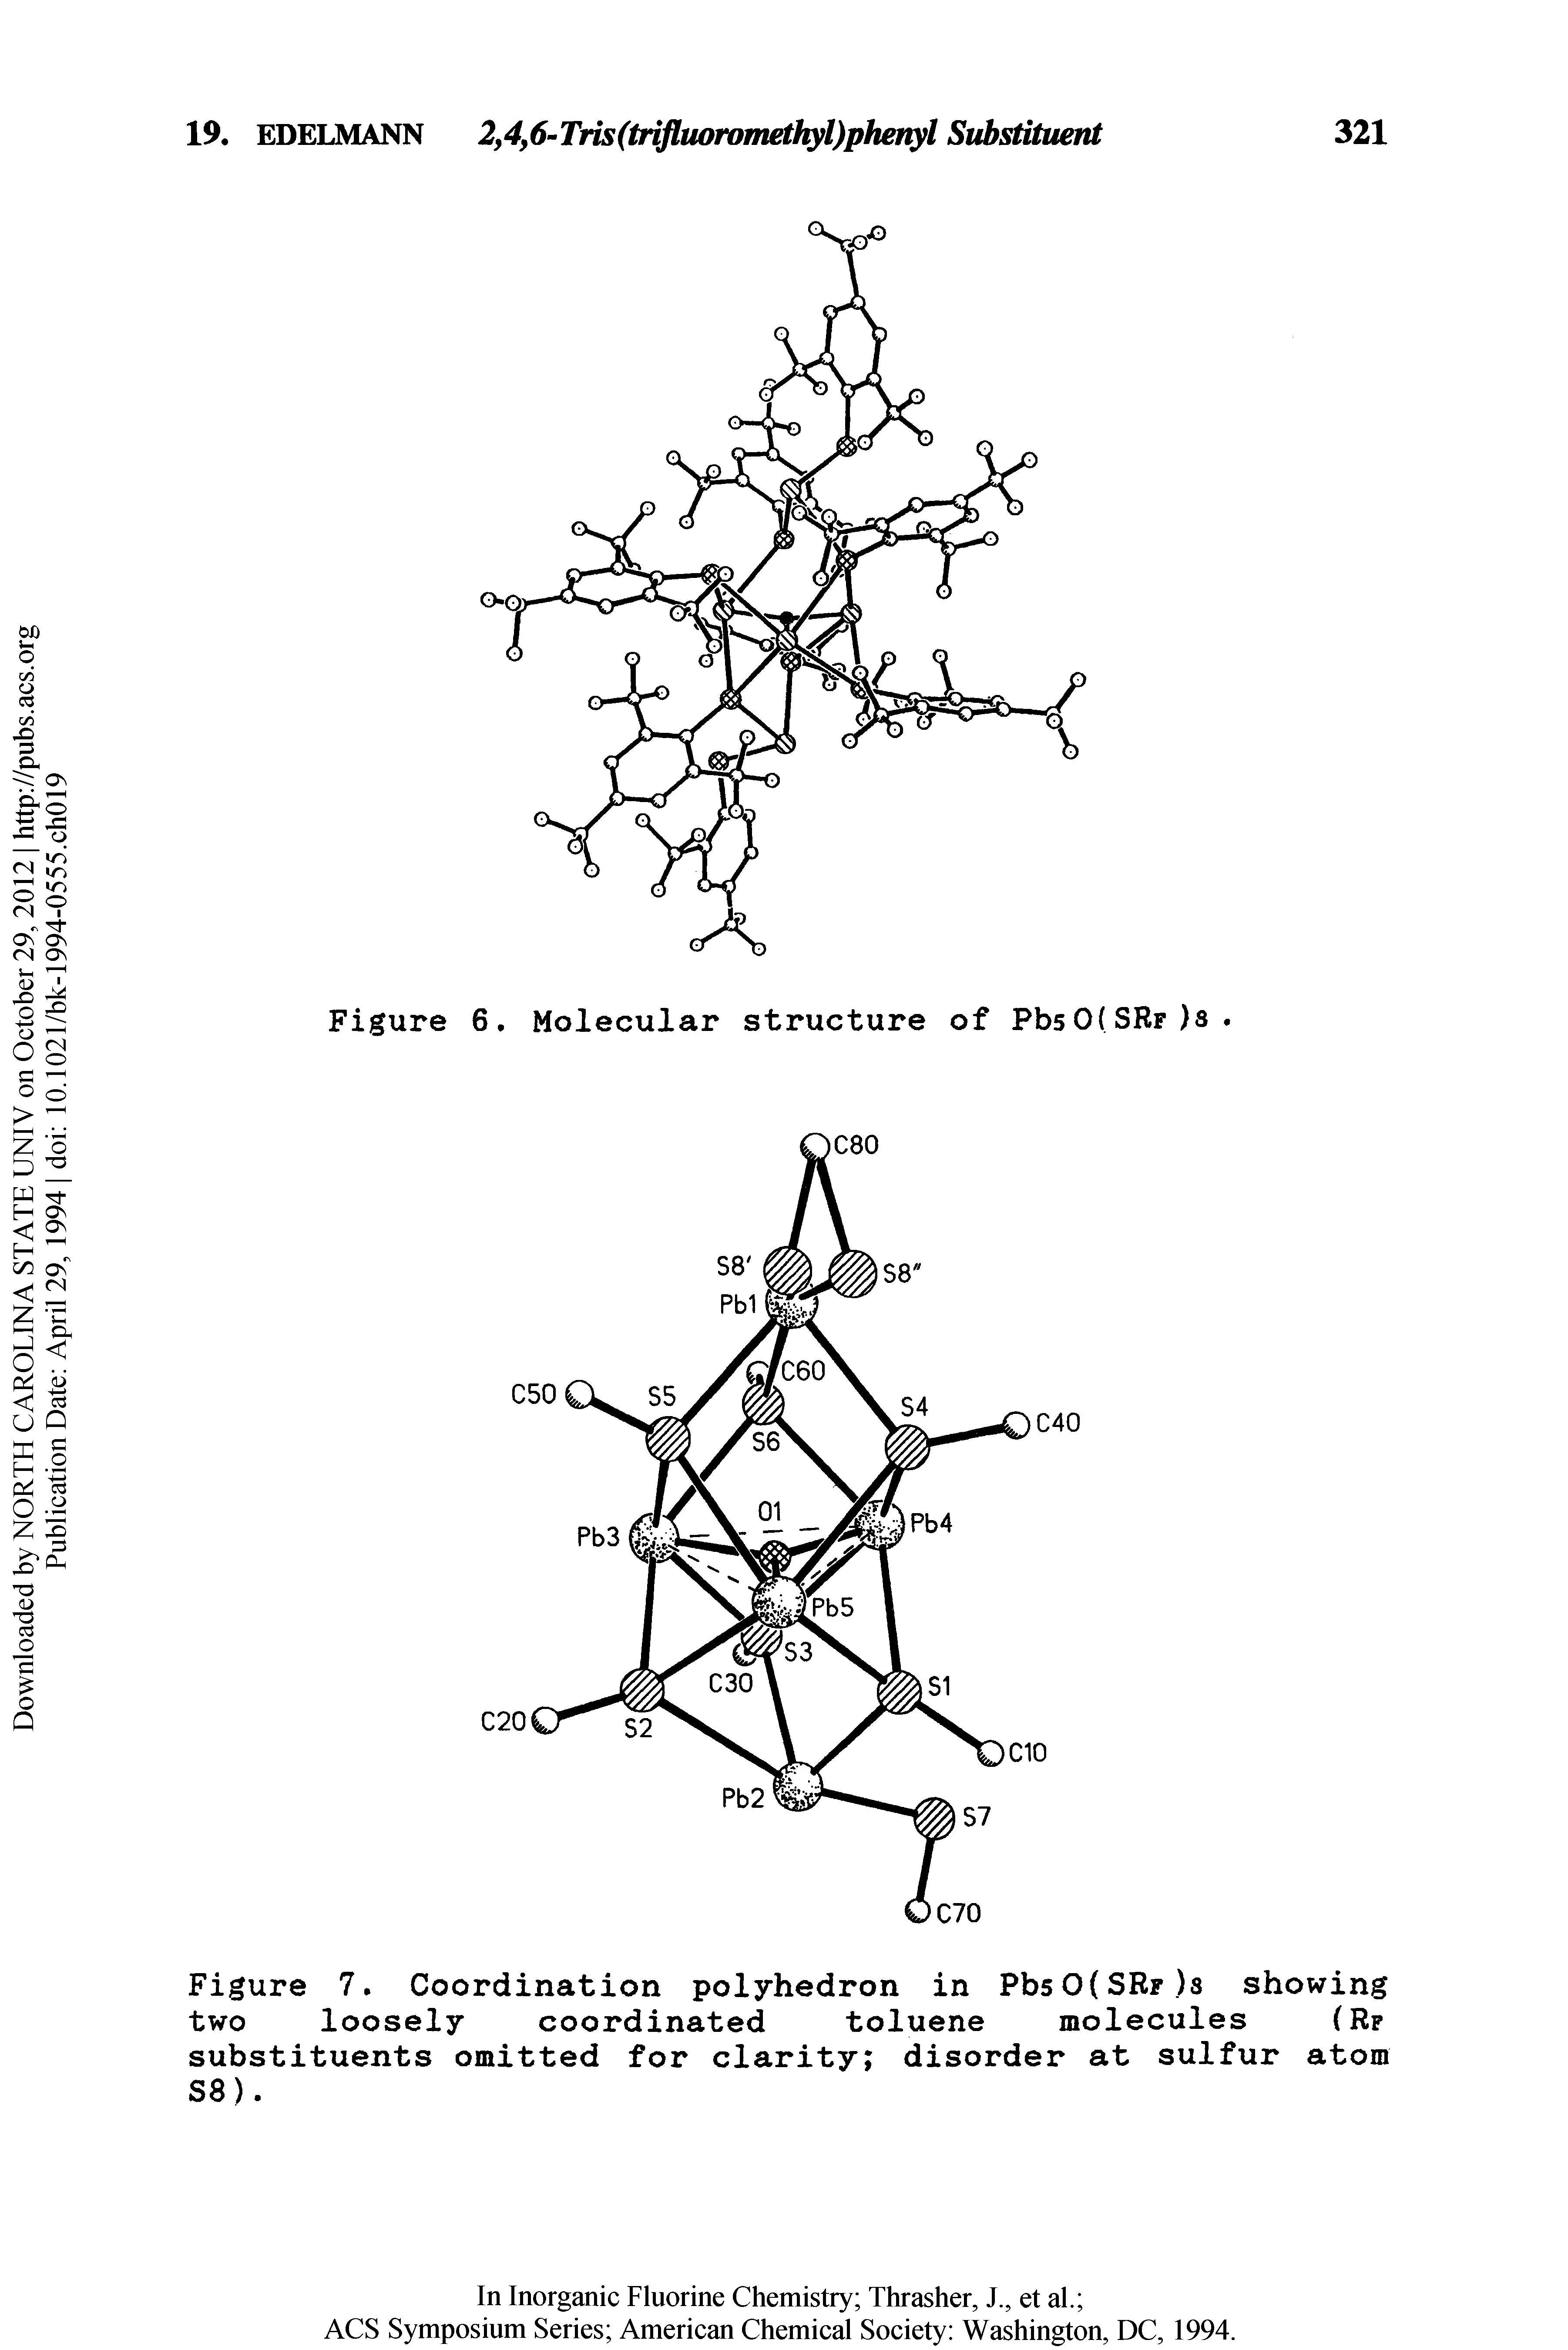 Figure 7, Coordination polyhedron in Pb50(SRr)s showing two loosely coordinated toluene molecules (Rp substituents omitted for clarity disorder at sulfur atom S8).